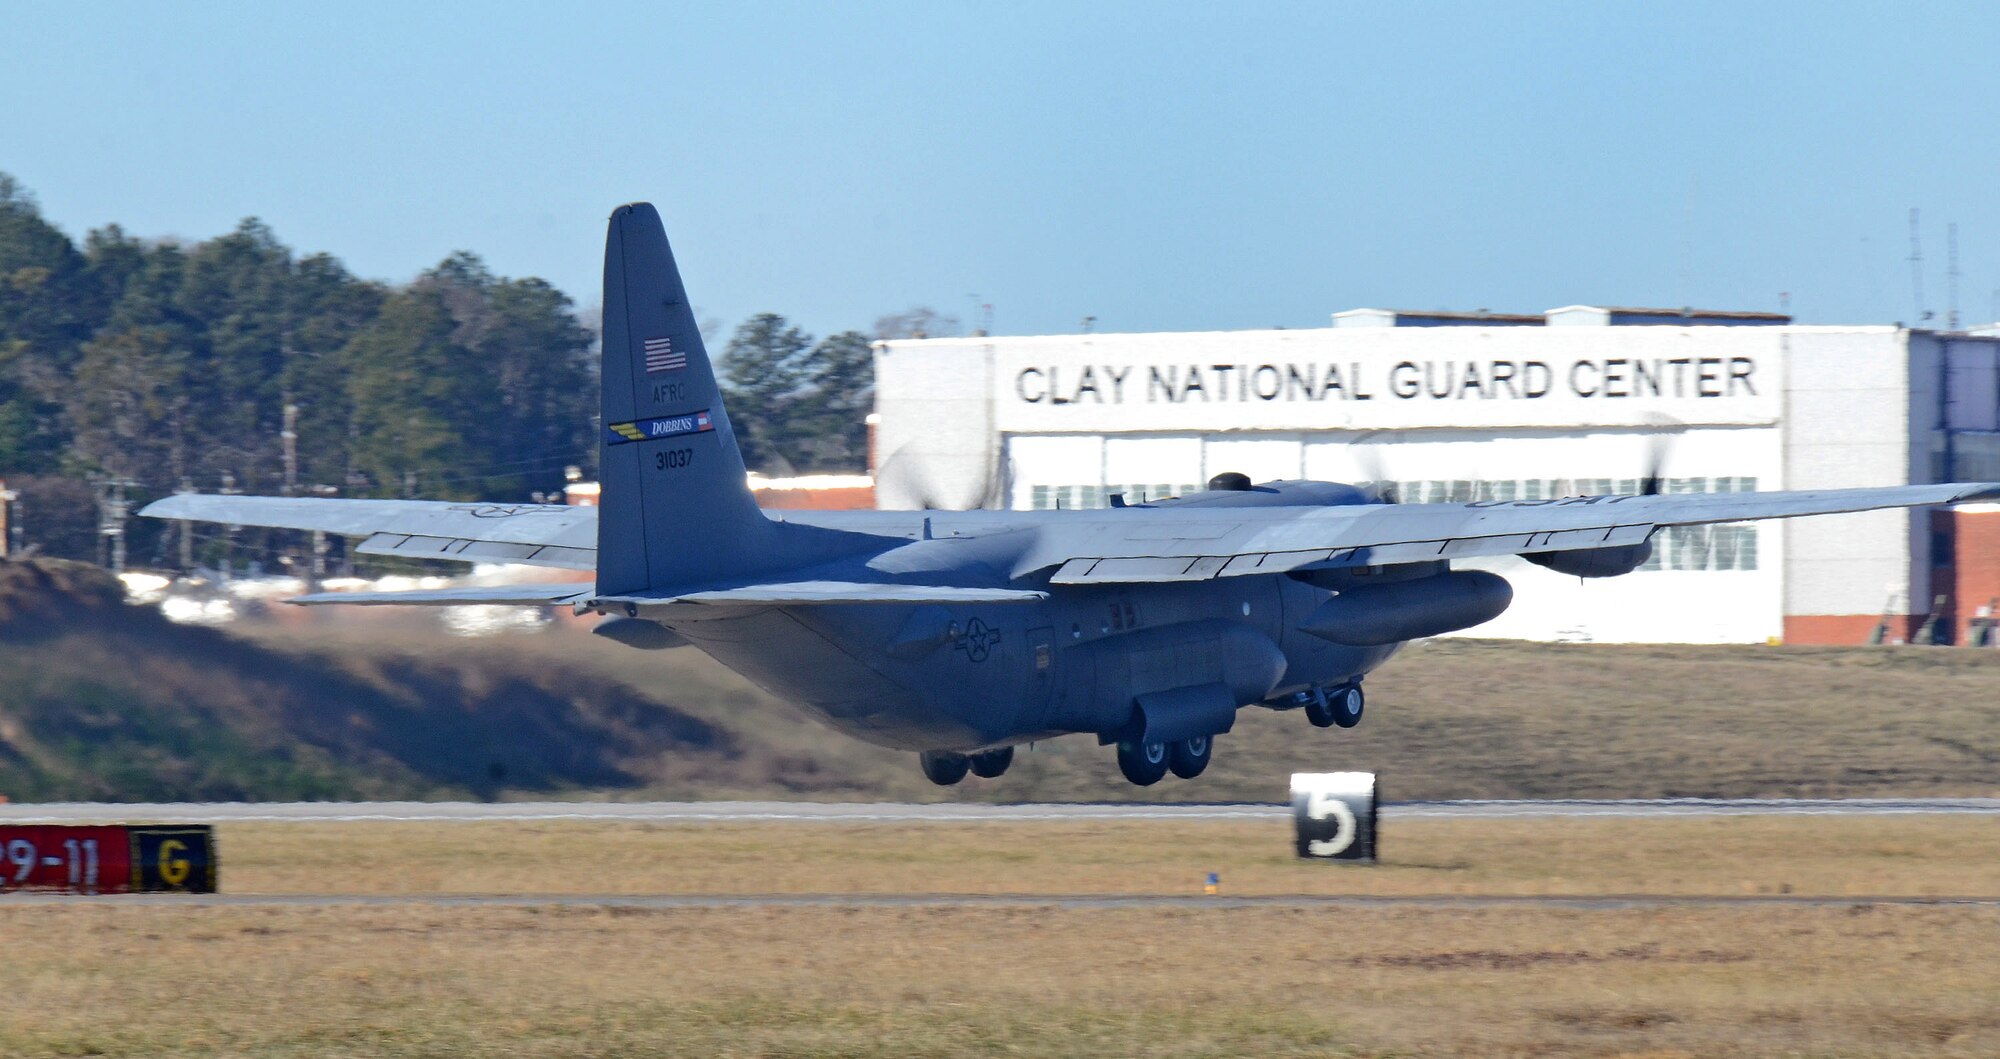 The 94th Airlift Wing C-130H departs the Dobbins runway on its way to Southwest Asia; Dobbins Air Reserve Base, Ga., Jan. 8, 2015. (U.S. Air Force photo/Brad Fallin)